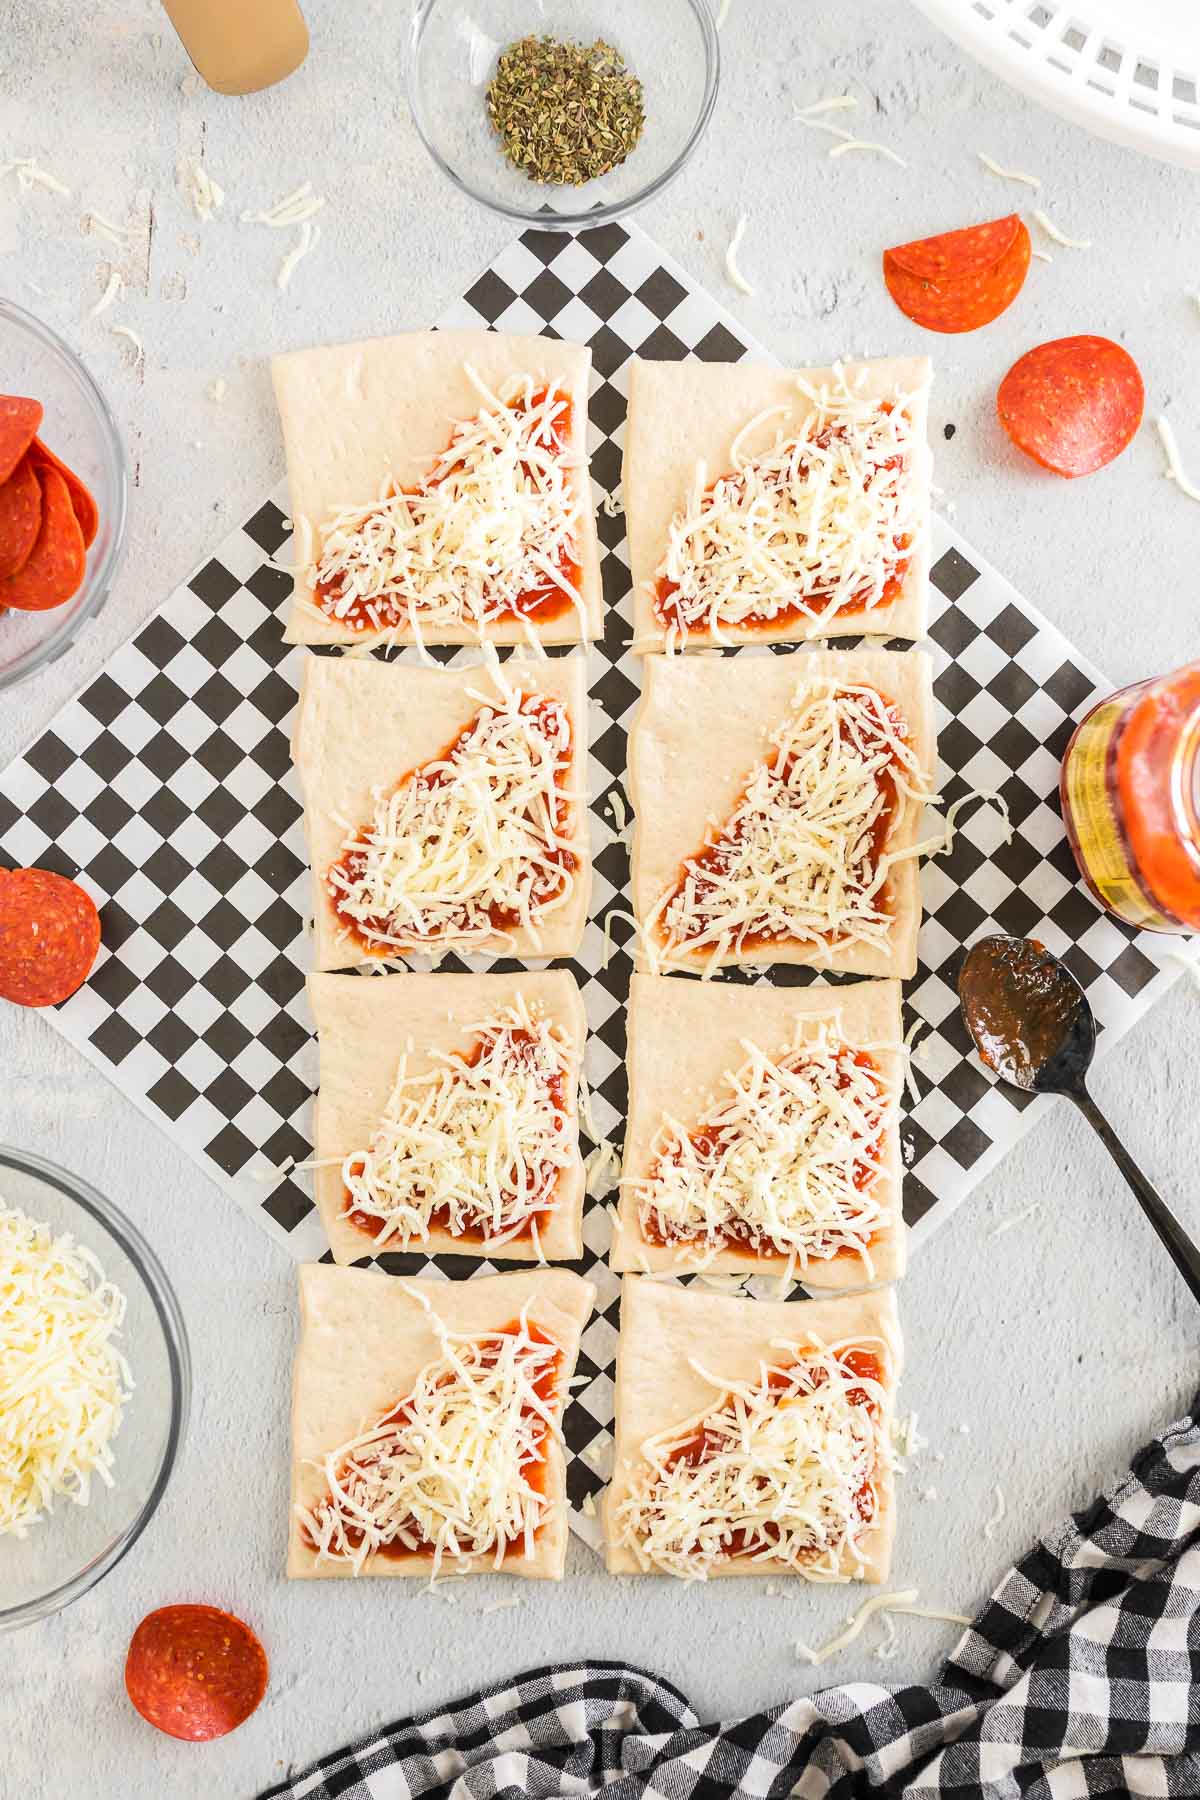 Mozzarella cheese placed over sauce on pizza crust.